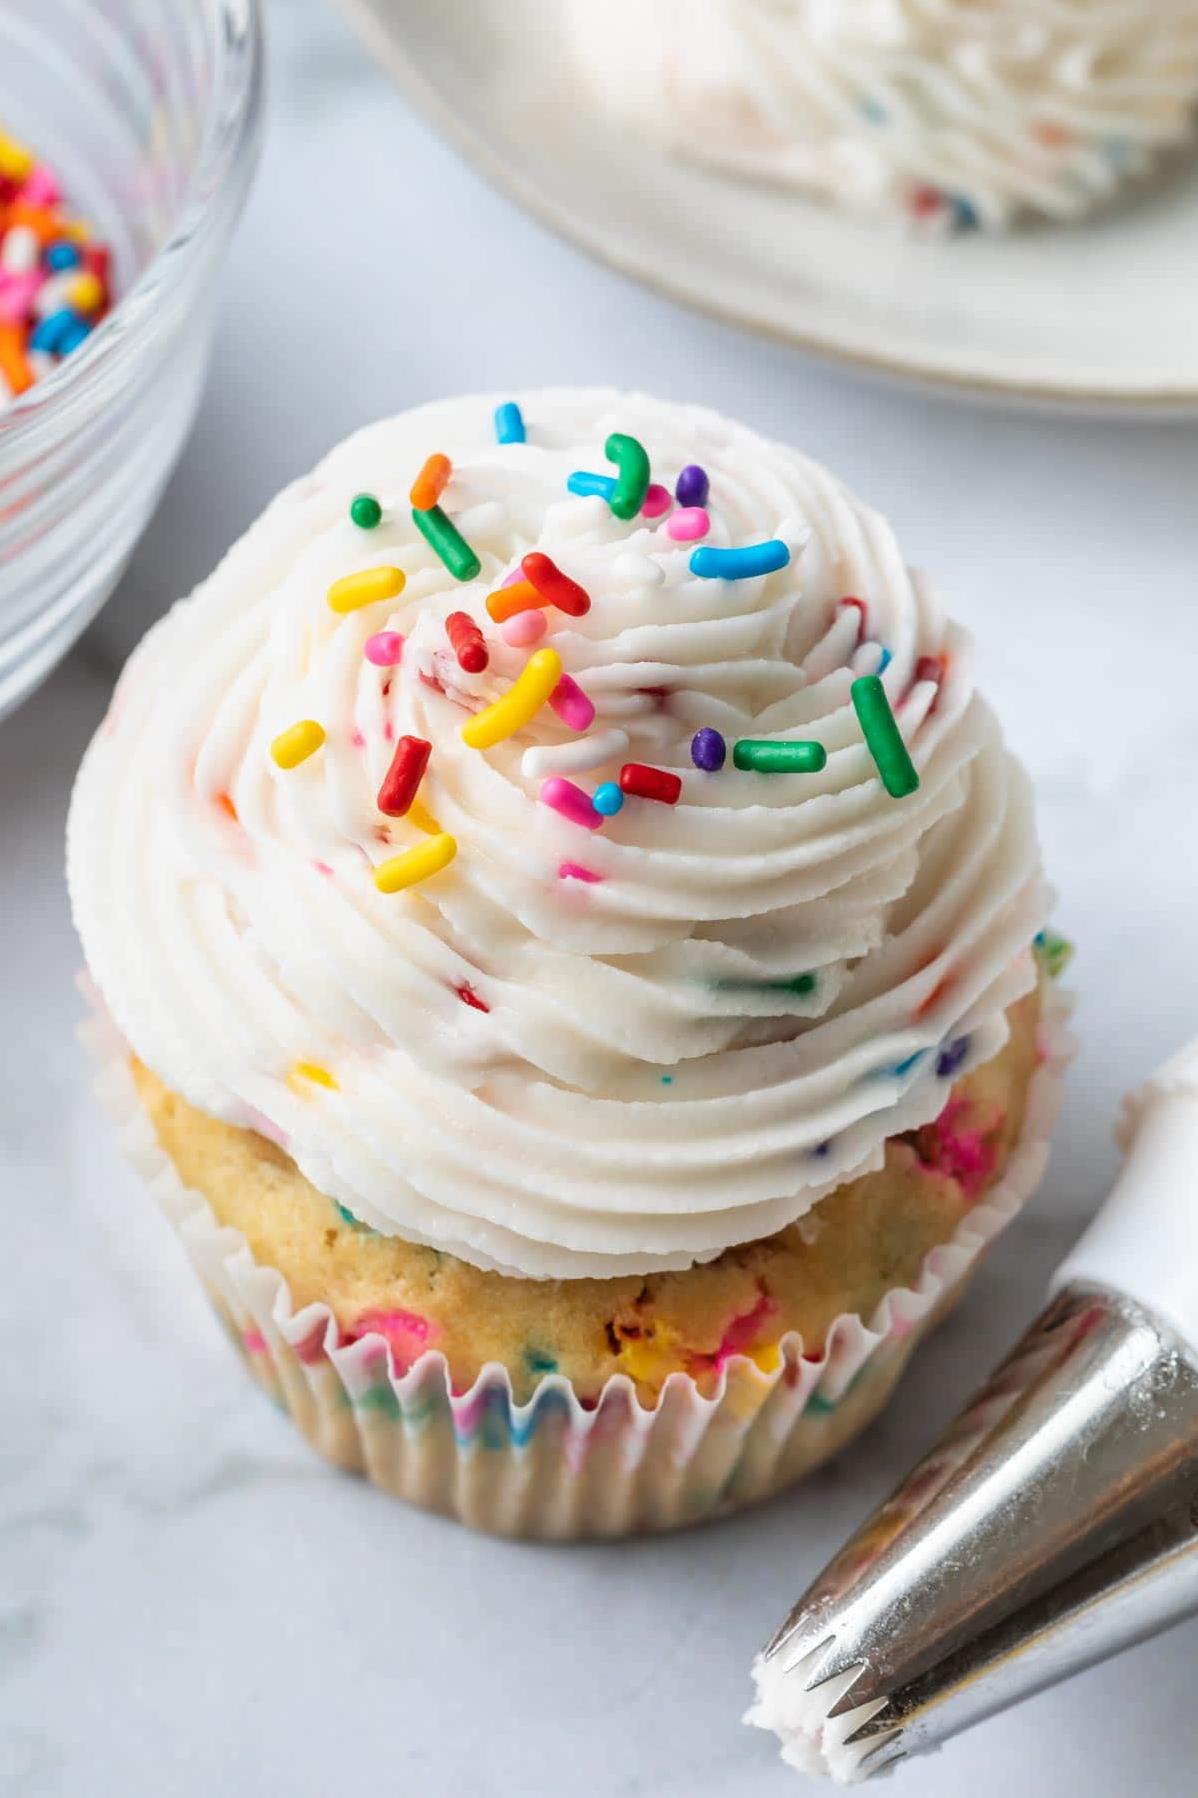  This frosting is the cherry on top of your favorite baked goods.